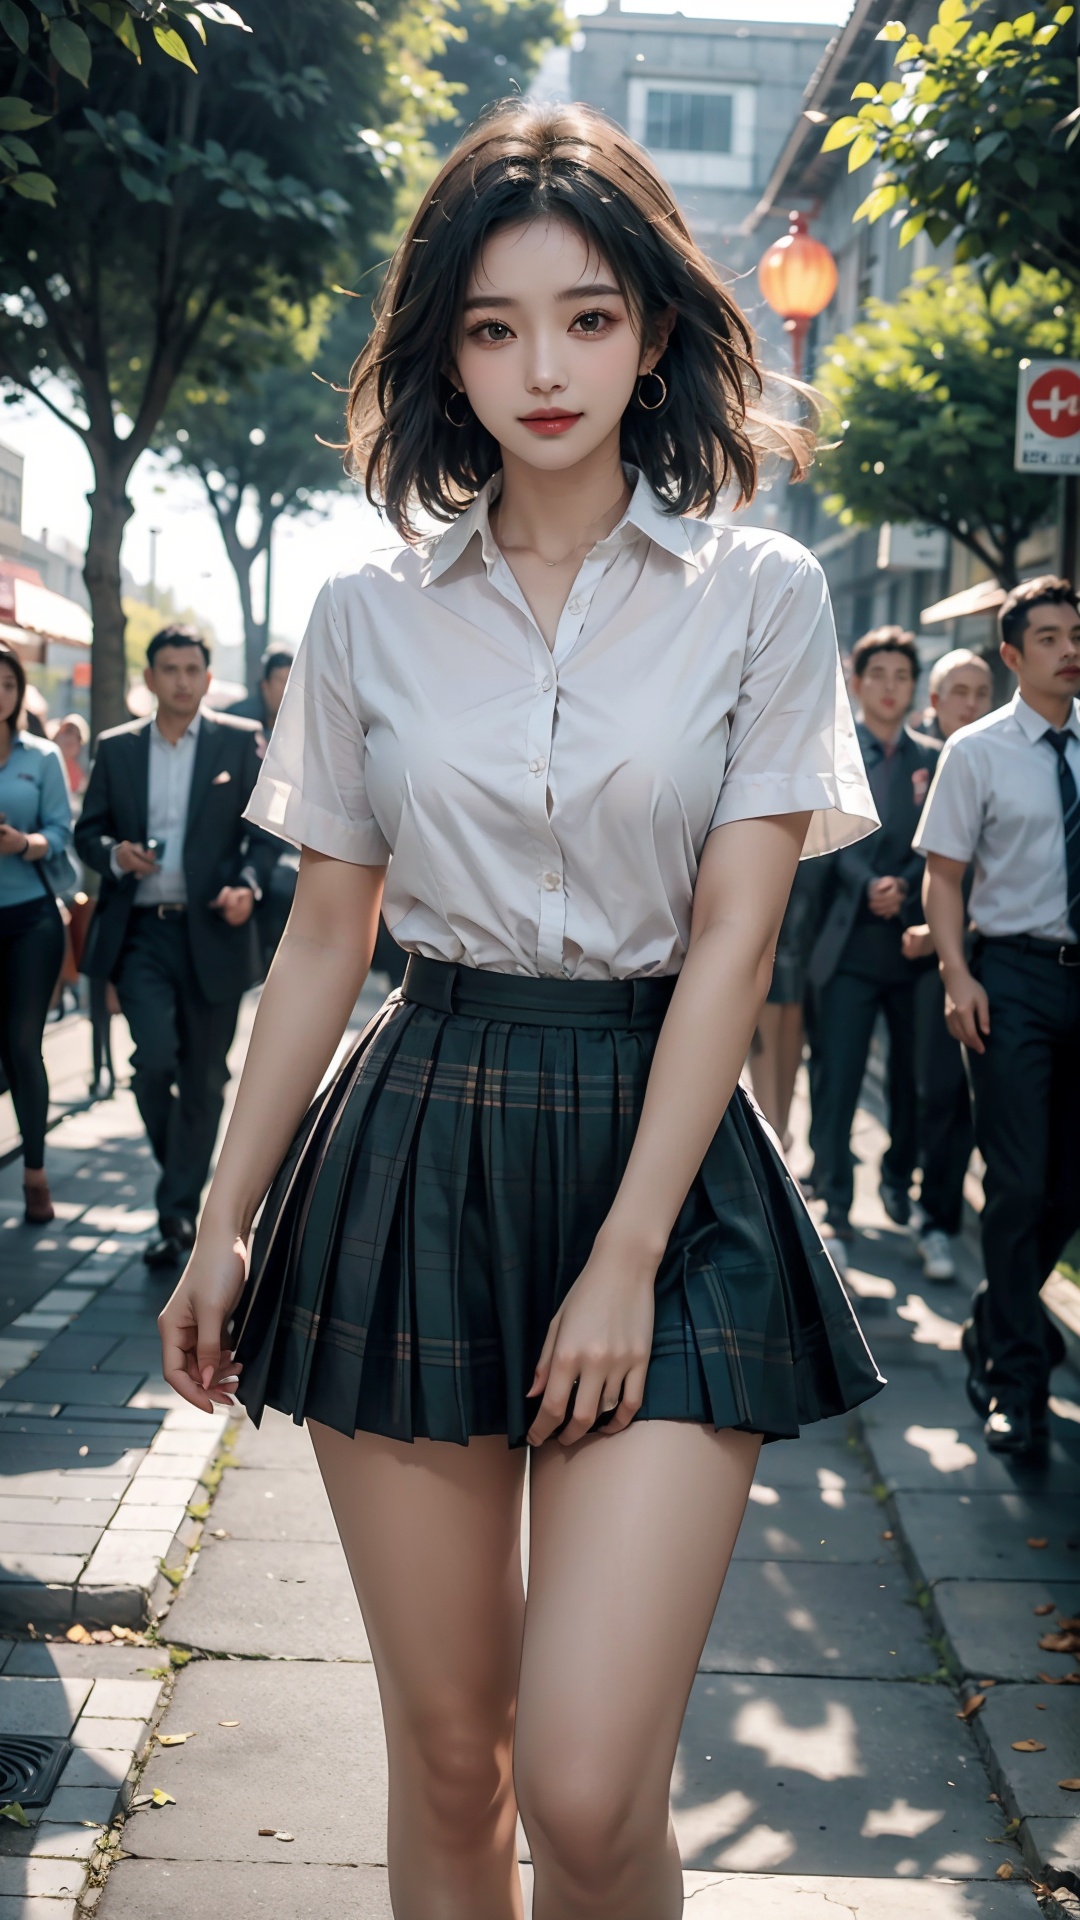  Woman posinginschoolyard、top-quality、女の子1 a person、middlebreasts、tag、with light glowing、blur backgroun、bokeh dof、outside ofhouse、(Street:0.8)、(aperson々、Large crowds:1、A slender、large full breasts、hi-school girl、Clothes that adhere perfectly to the body、White collared shirt、shortsleeves、（Pleated skirt with dark green check)、Floating hair、Long、Forehead:0.8)、Beautiful skywithdetails、耳Nipple Ring、A slender、Sareme、 (above knee)、Soft lighting、the wind、glowy skin、A smile、The wind is blowing、